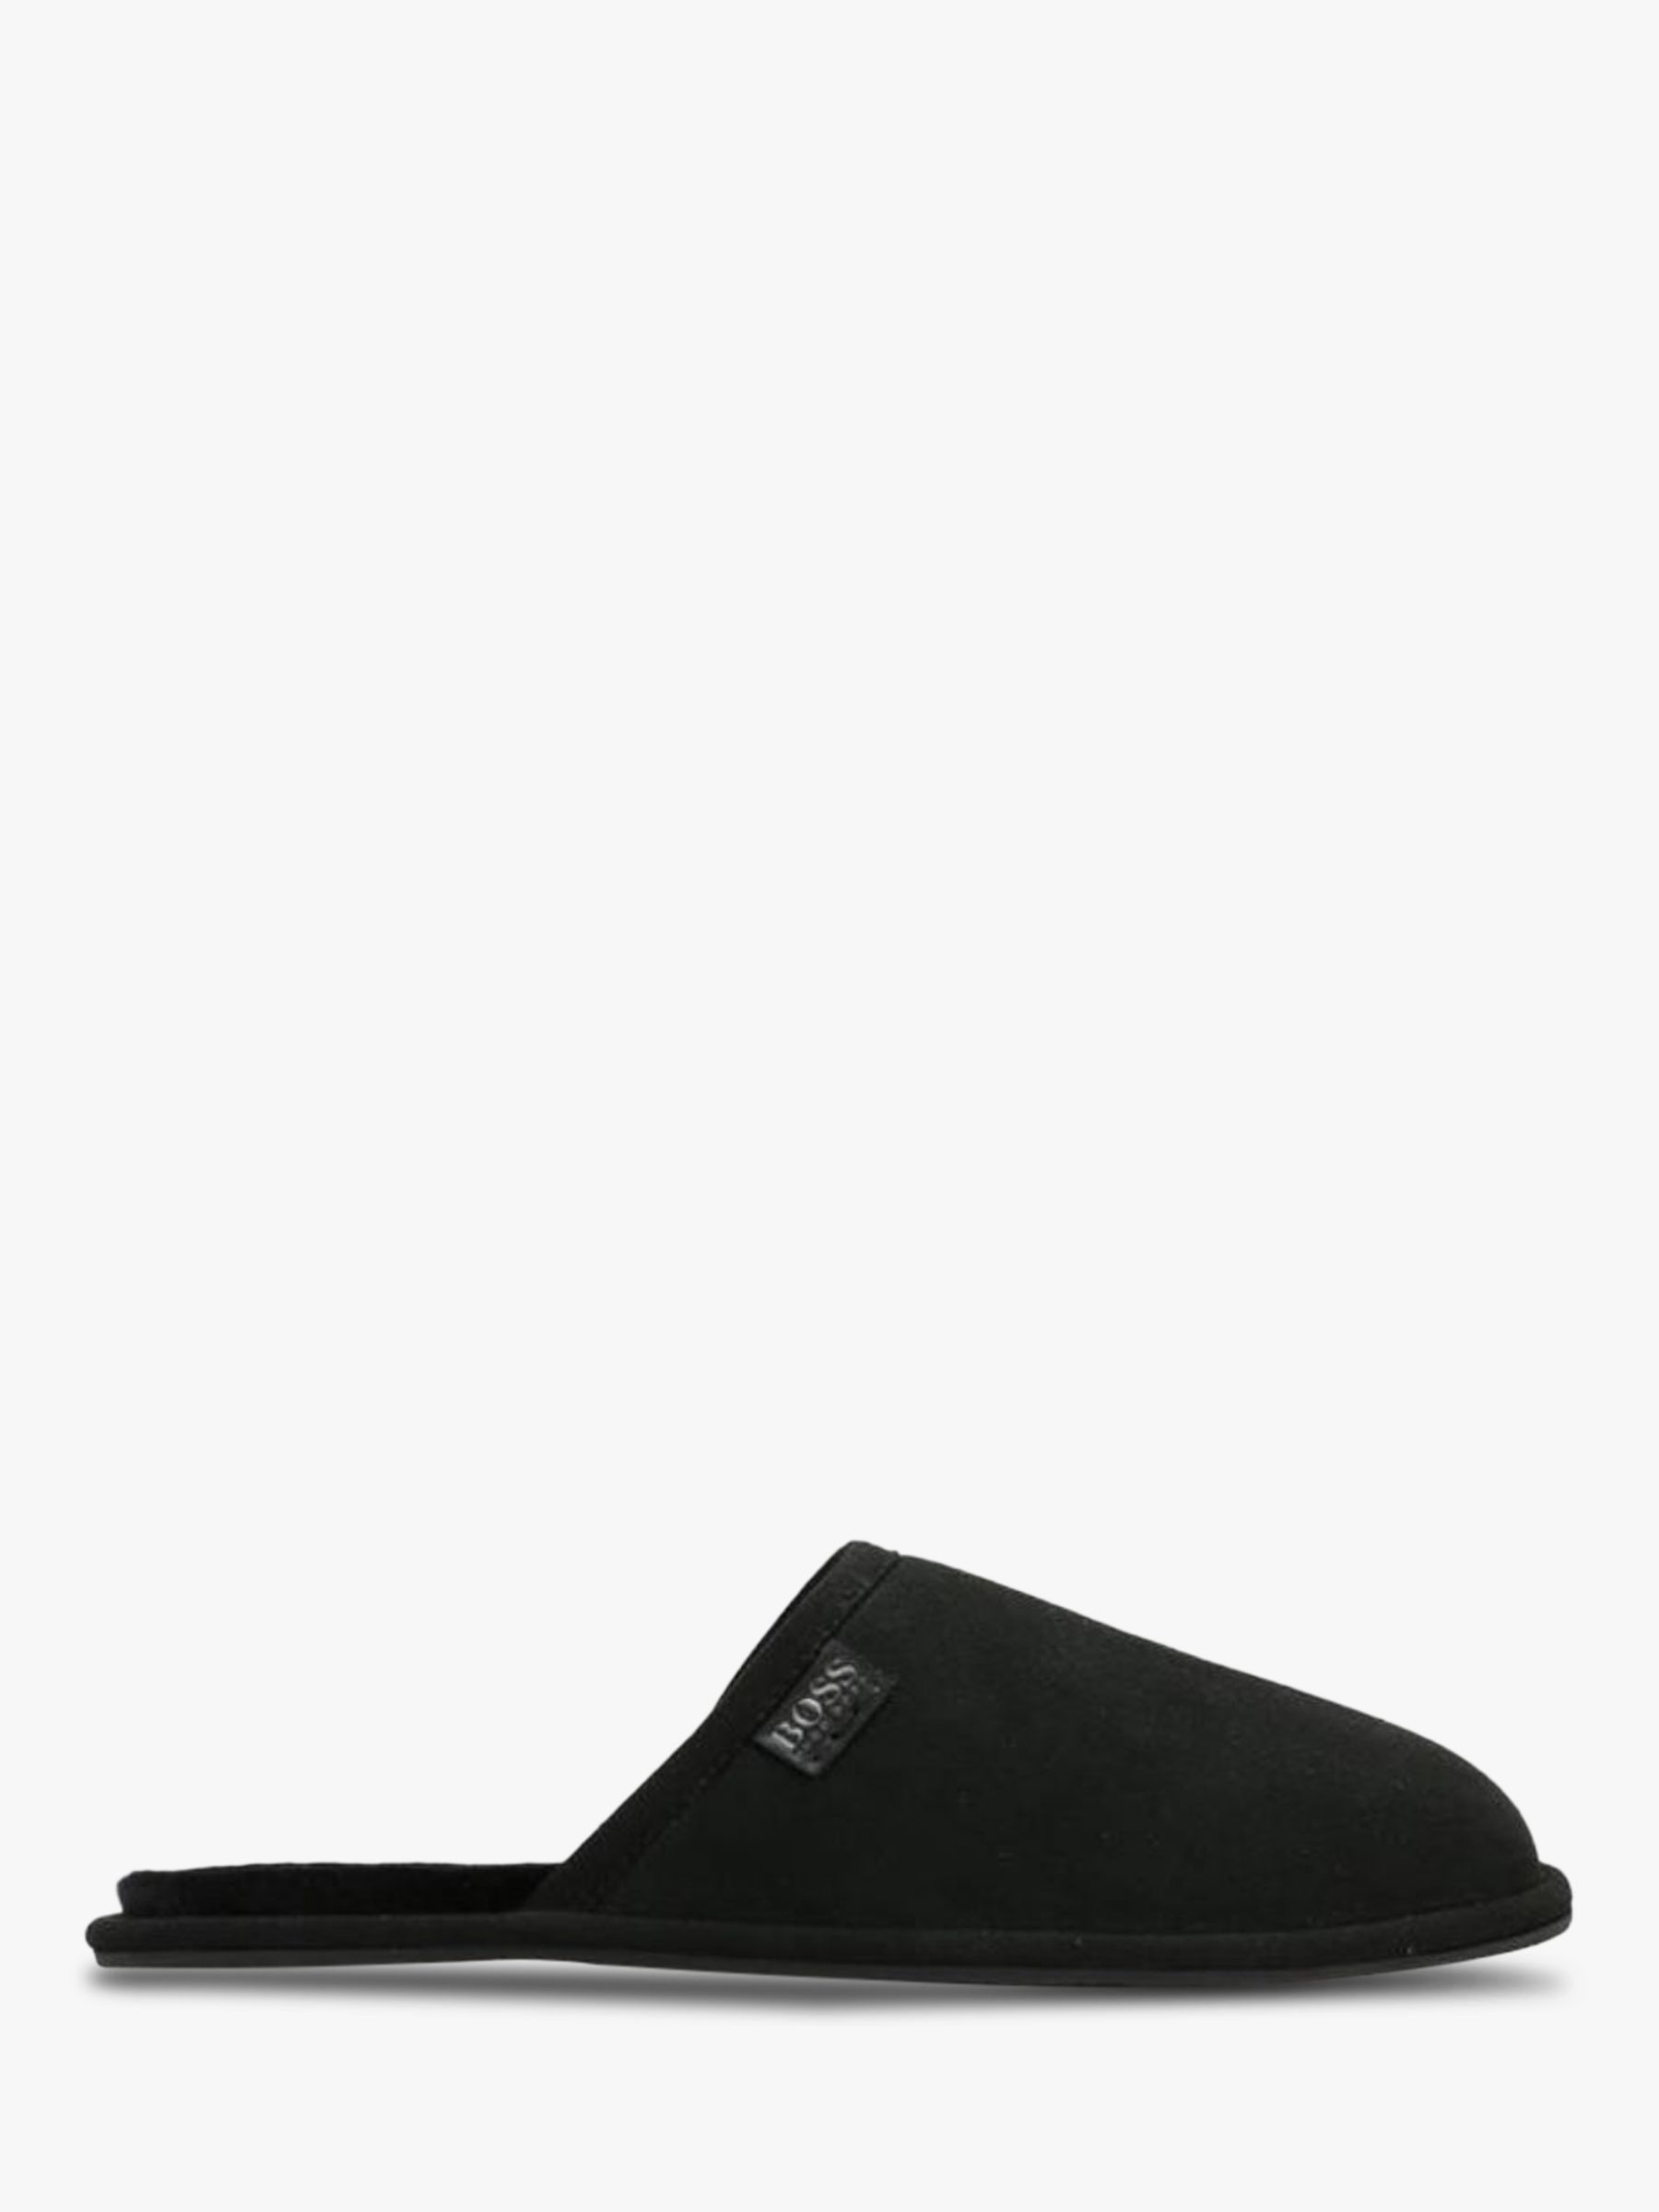 BOSS Home Suede Slippers at John Lewis 